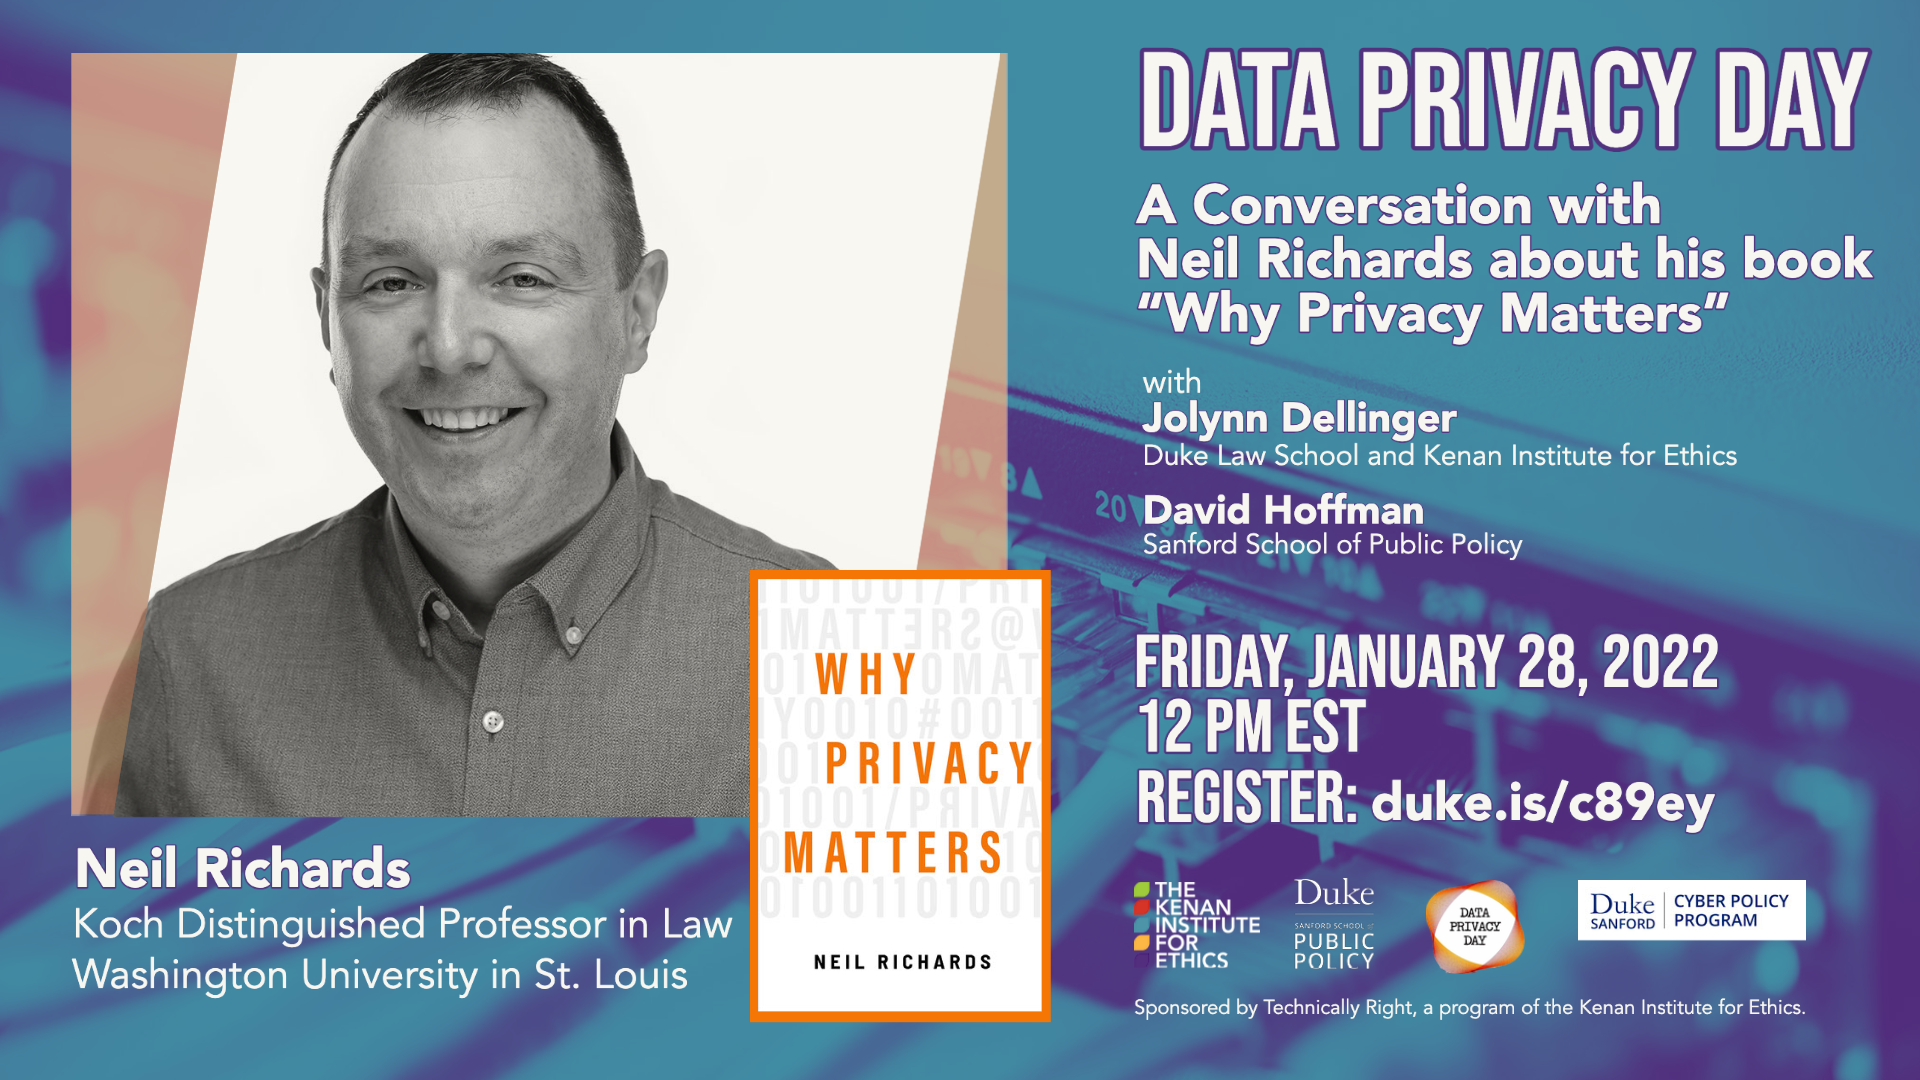 Data Privacy Day: A Conversation with Neil Richards about his book "Why Privacy Matters." Headshot of speaker and book cover. Other event details listed.